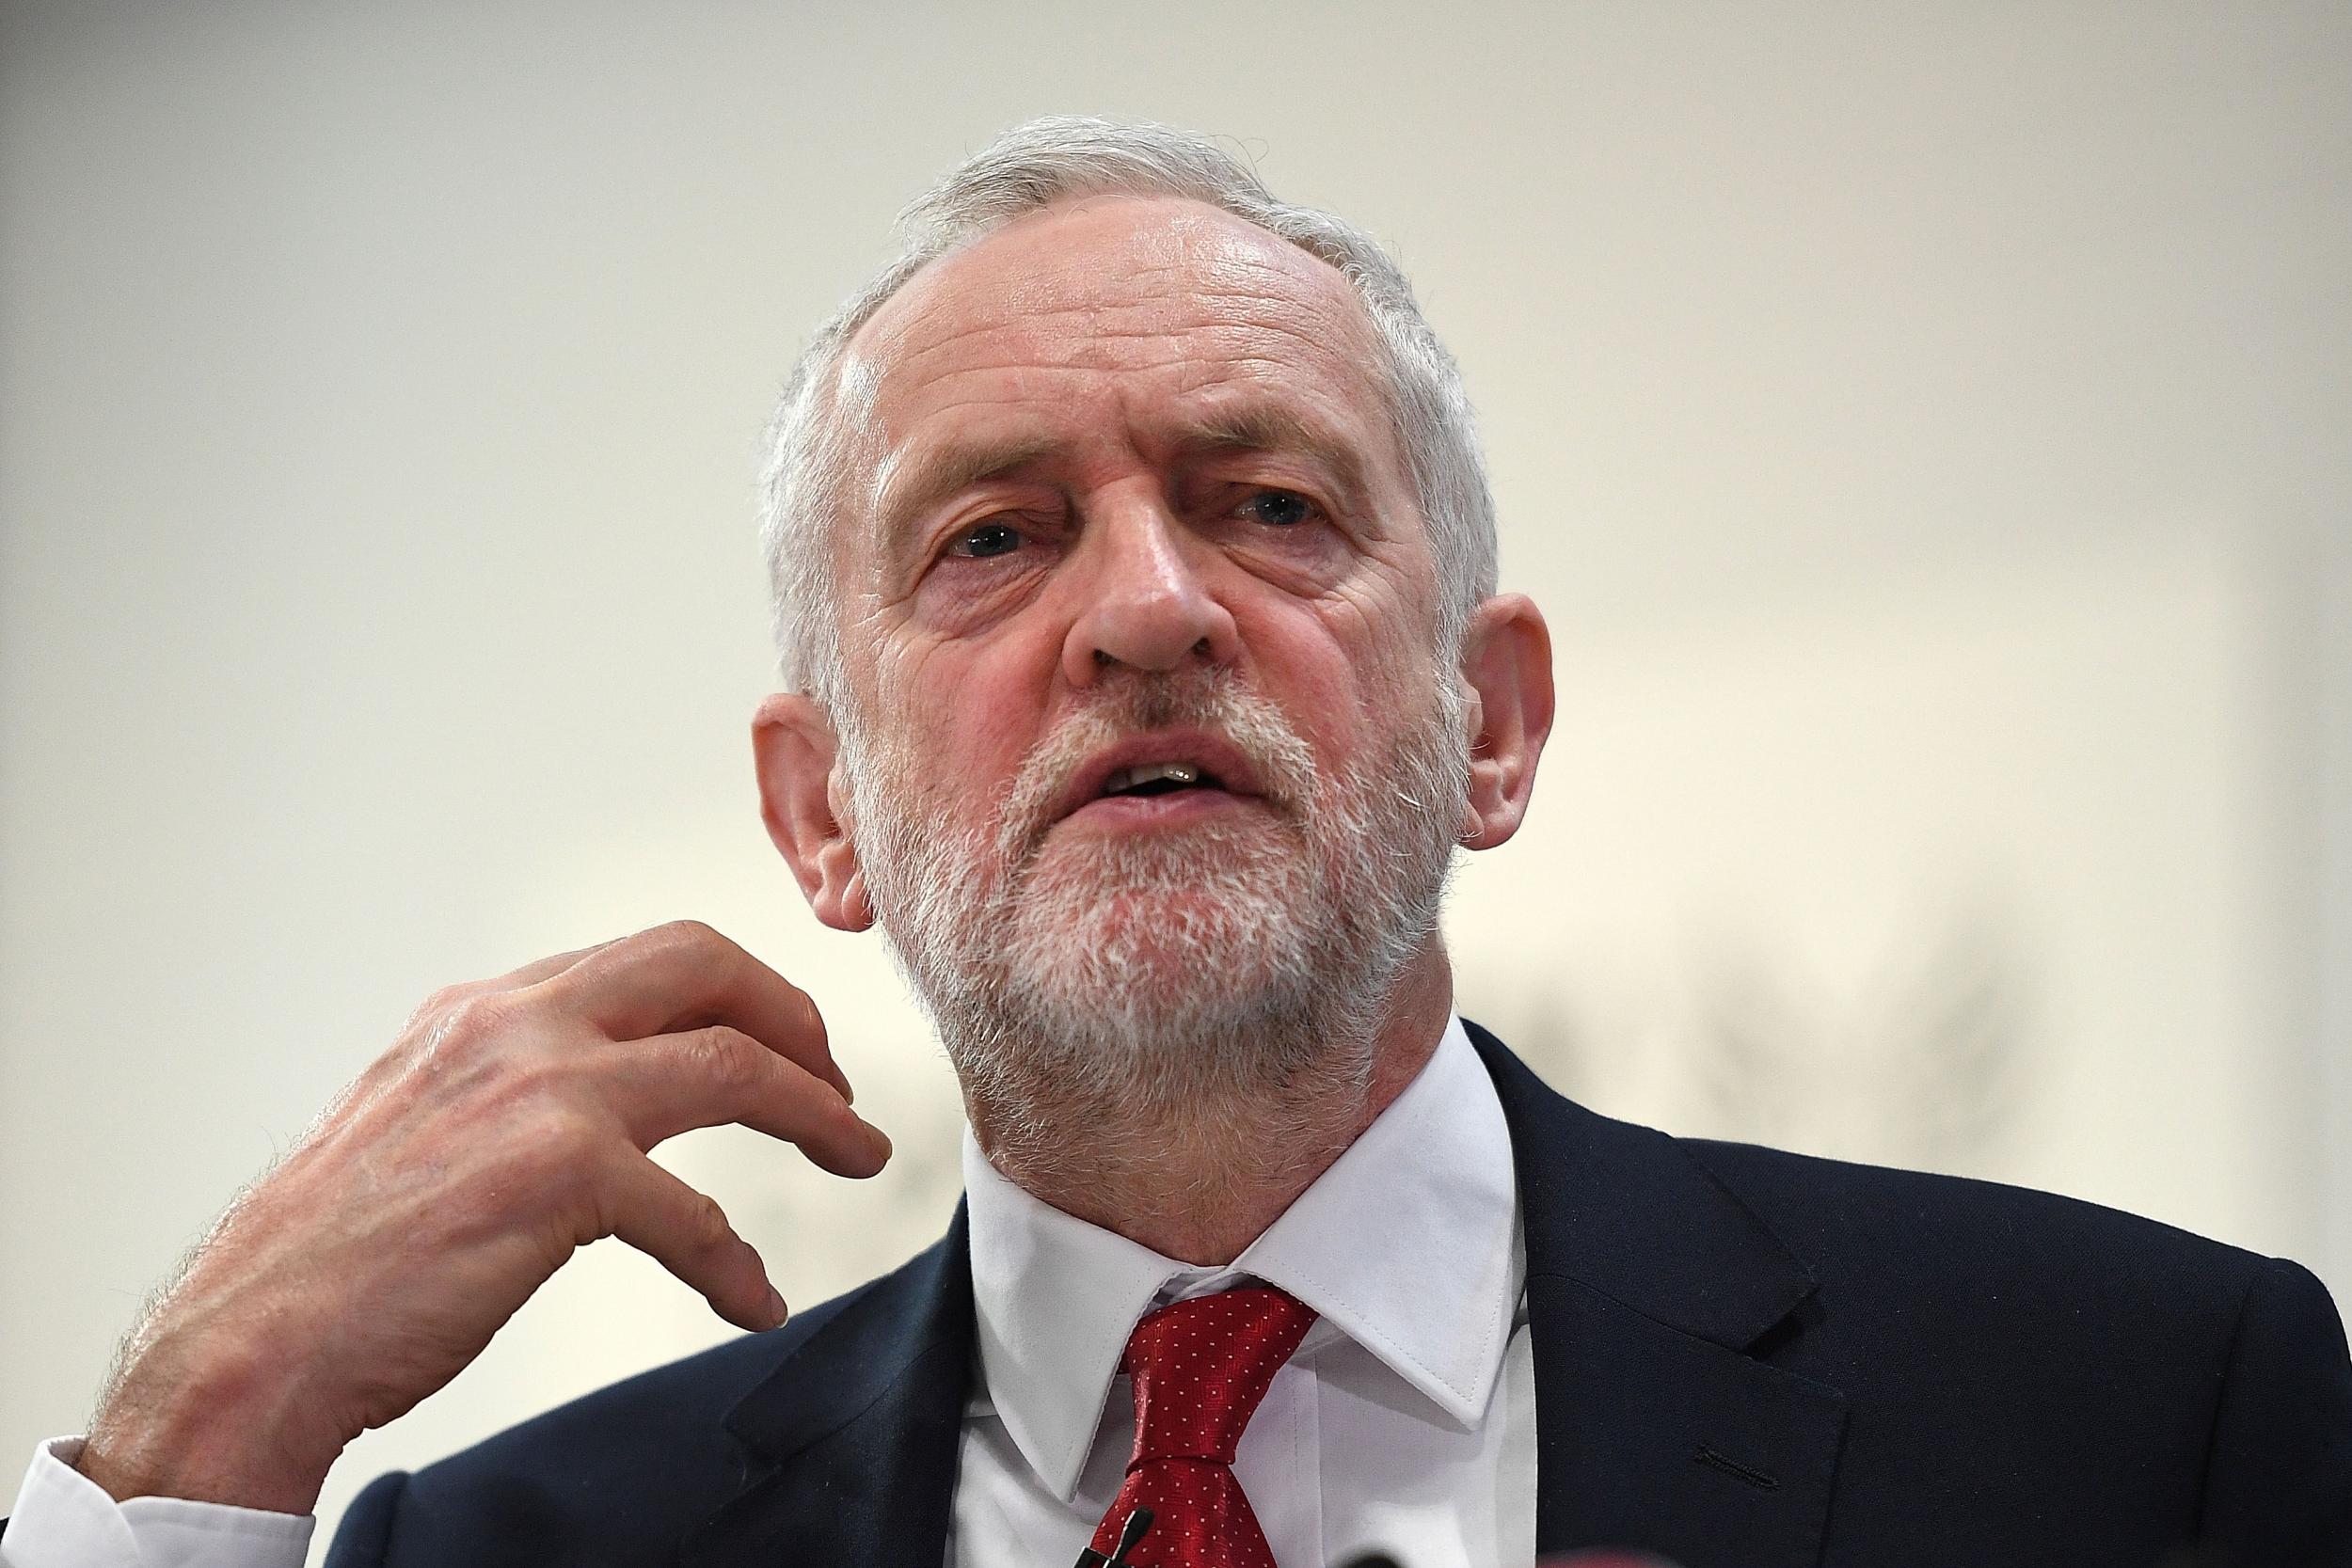 Labour leader Jeremy Corbyn believes UK ministers should be held accountable for children's deaths